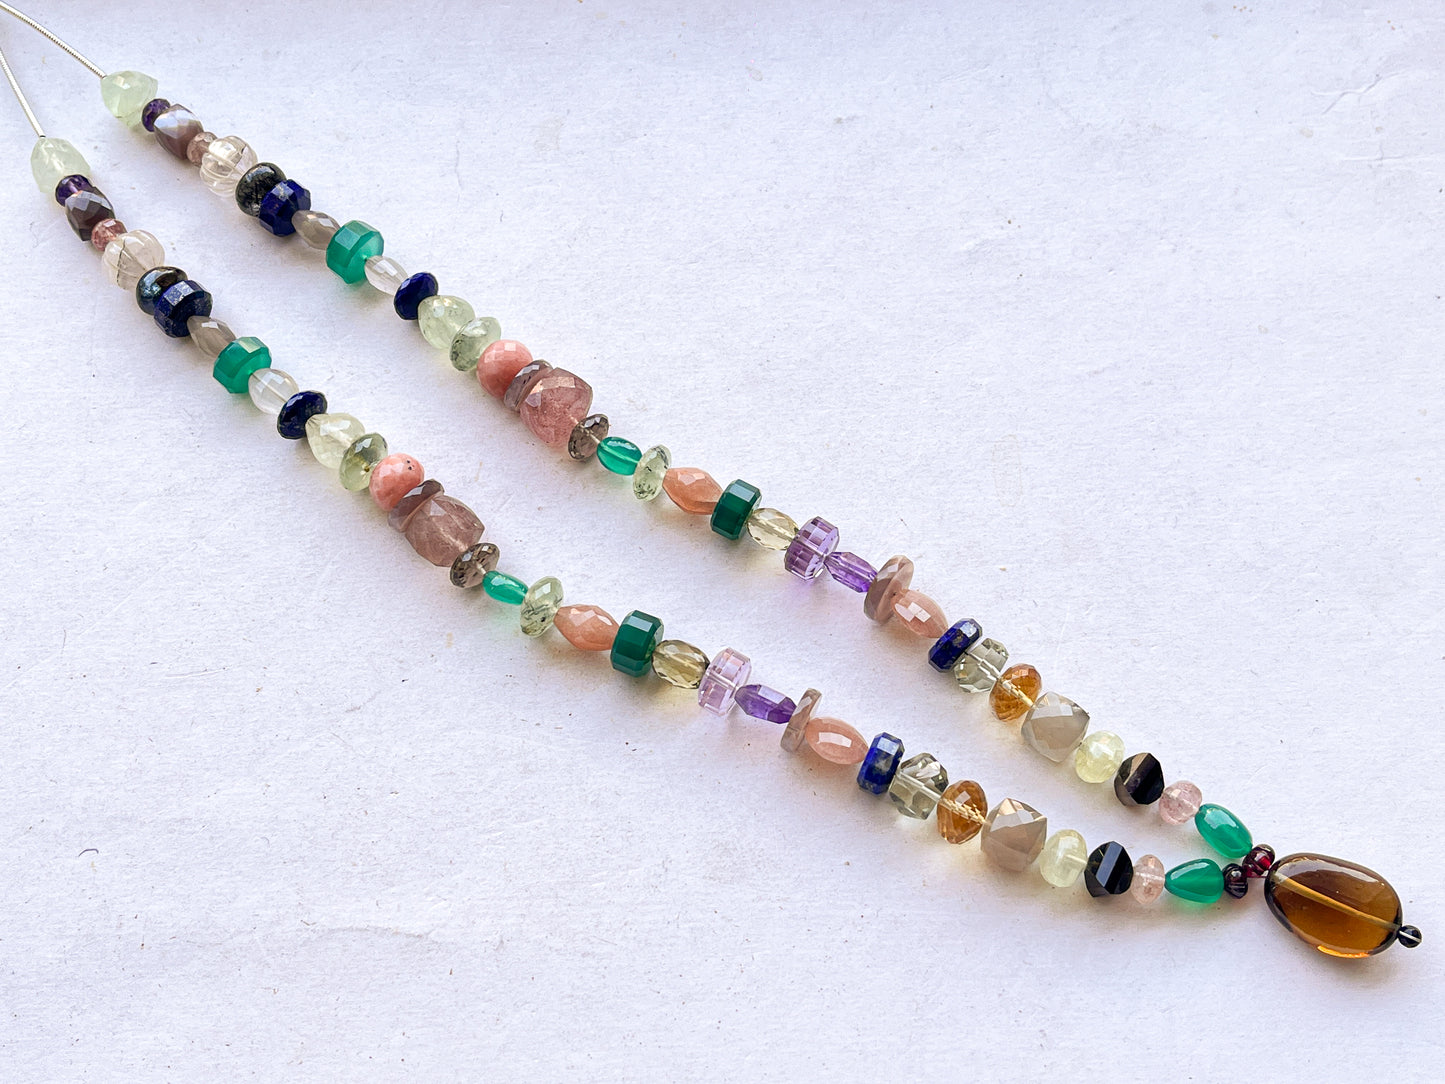 Fusion of Mix Gemstones (All Natural) with various Shapes & Designs in Pair all in One Strand, Gemstone Necklace SET1-10